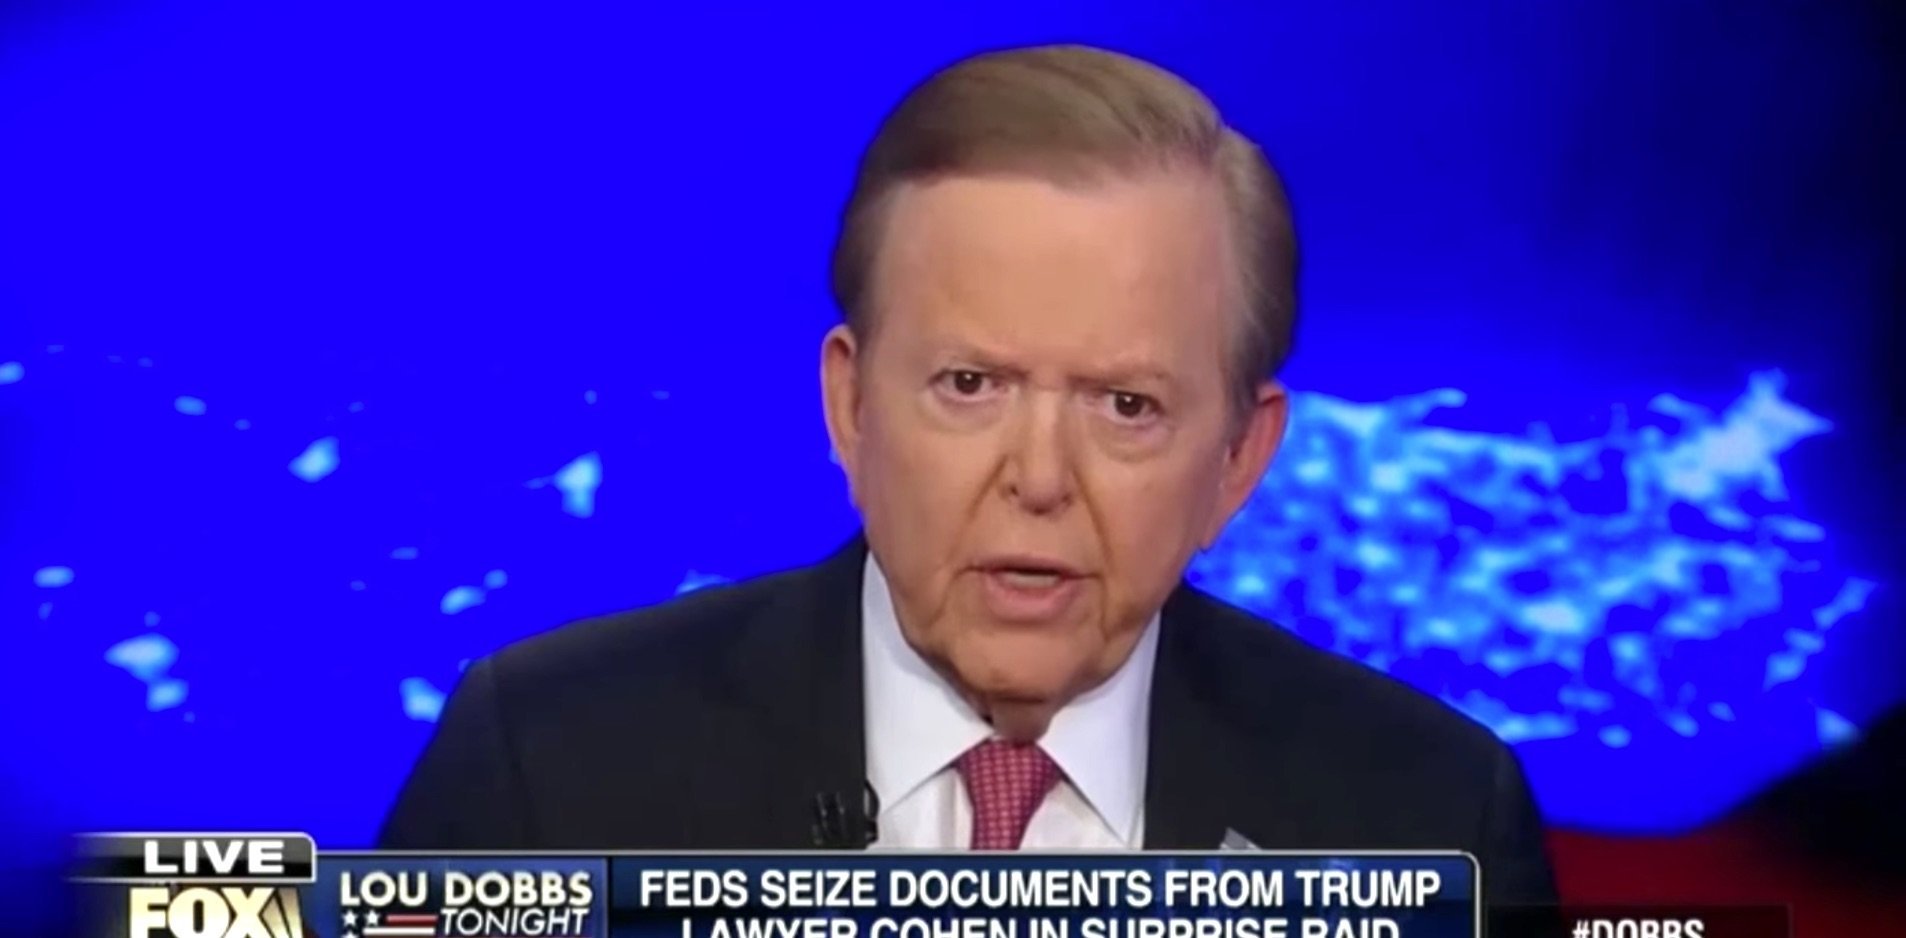 Lou Dobbs Flips Out On Live TV, Urges Trump To 'Fire The SOB' Robert Mueller